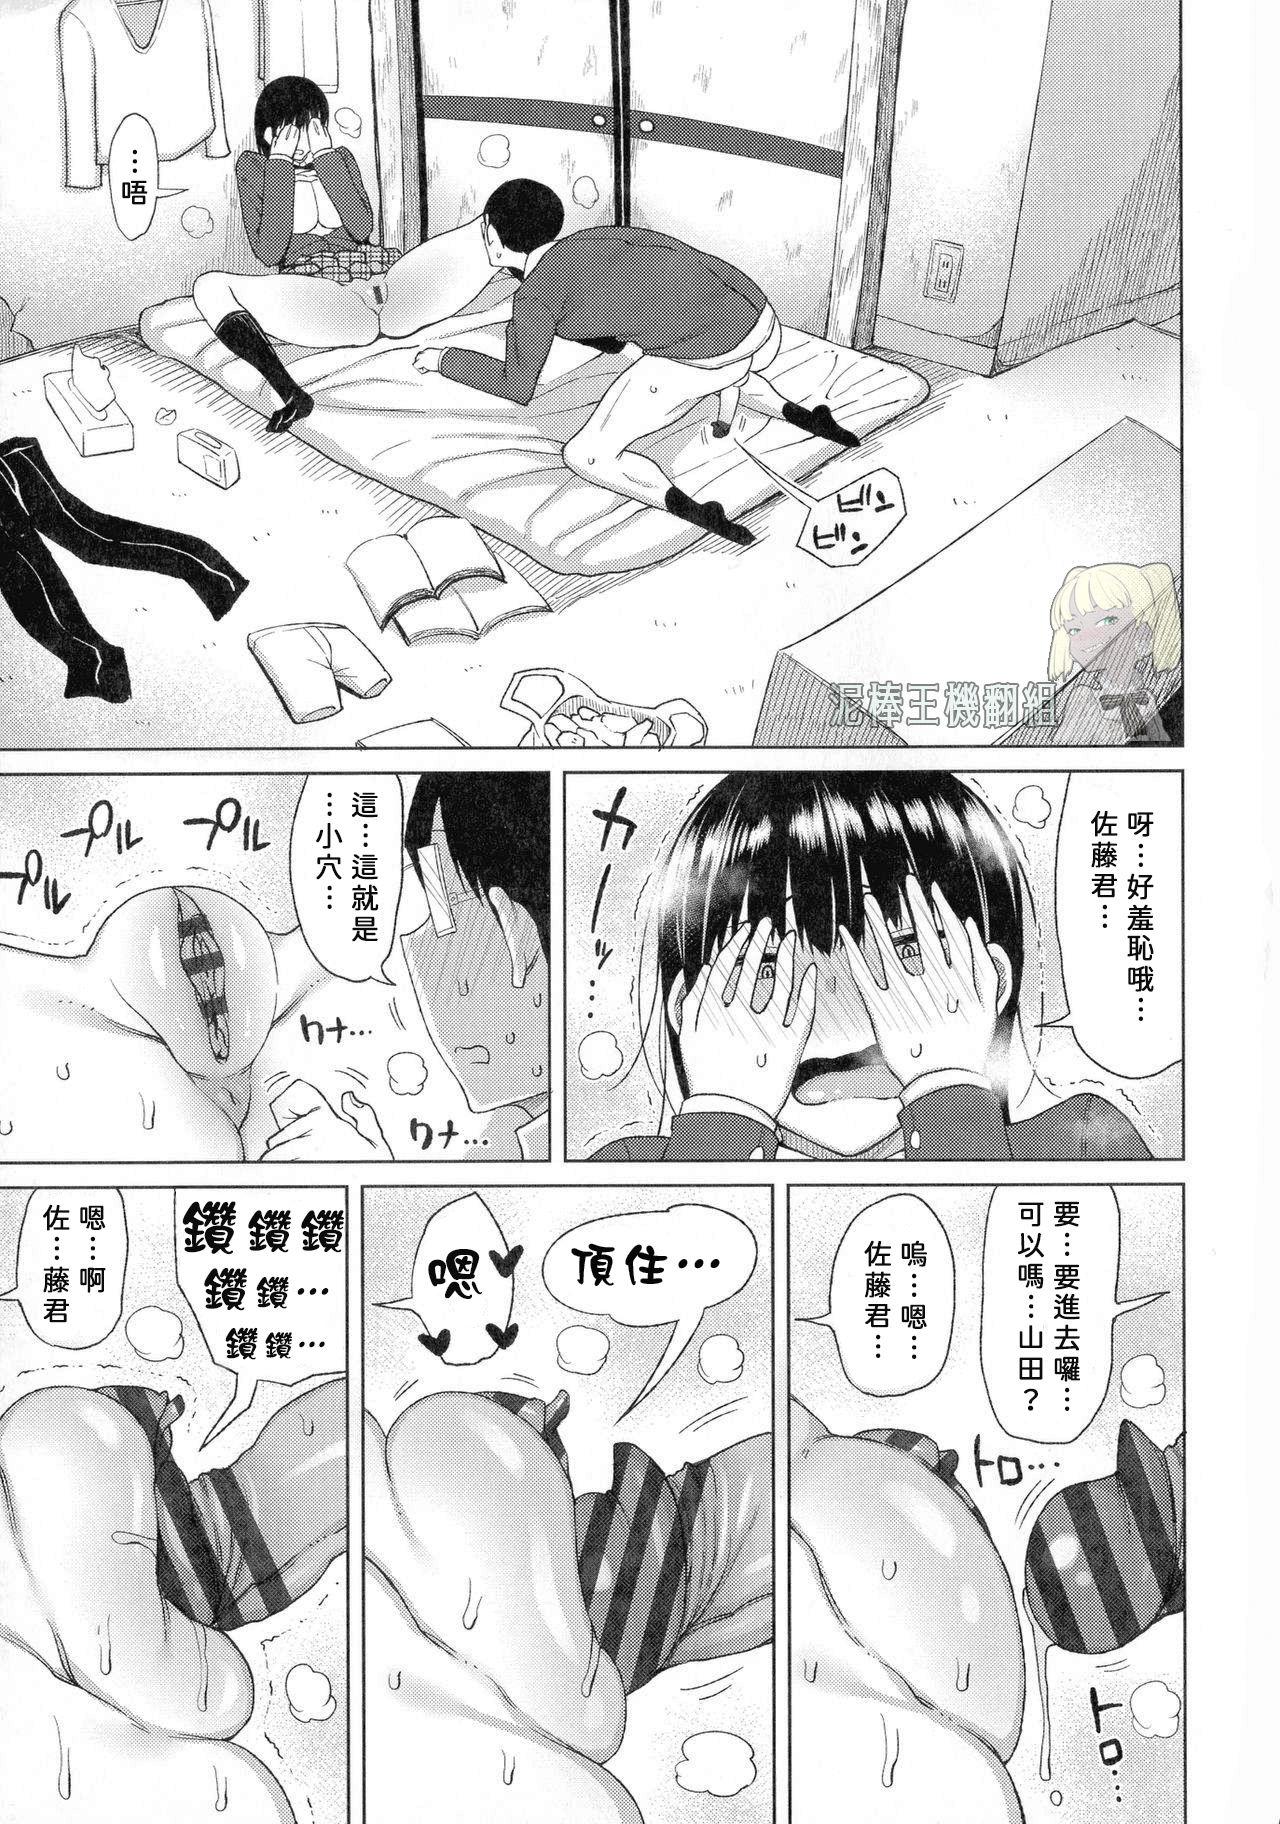 Pick Up Two inconspicuous Gikochina SEX | 不起眼邊緣人的雜魚交尾 Bubble - Page 9